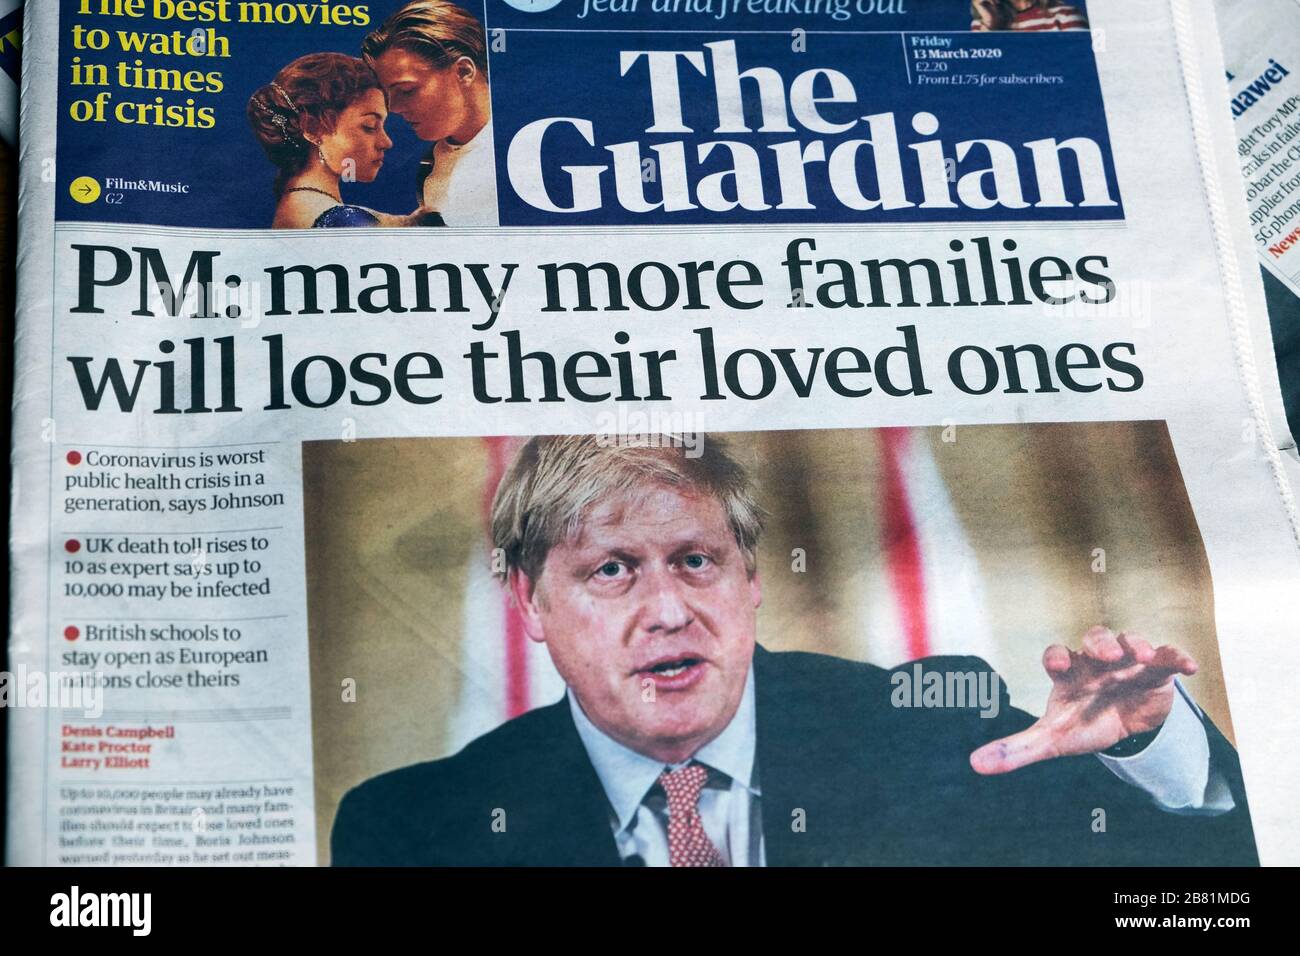 Boris Johnson 'PM: many more families will lose their loved ones' The Guardian front page newspaper headline 13 March 2020 London England UK Stock Photo